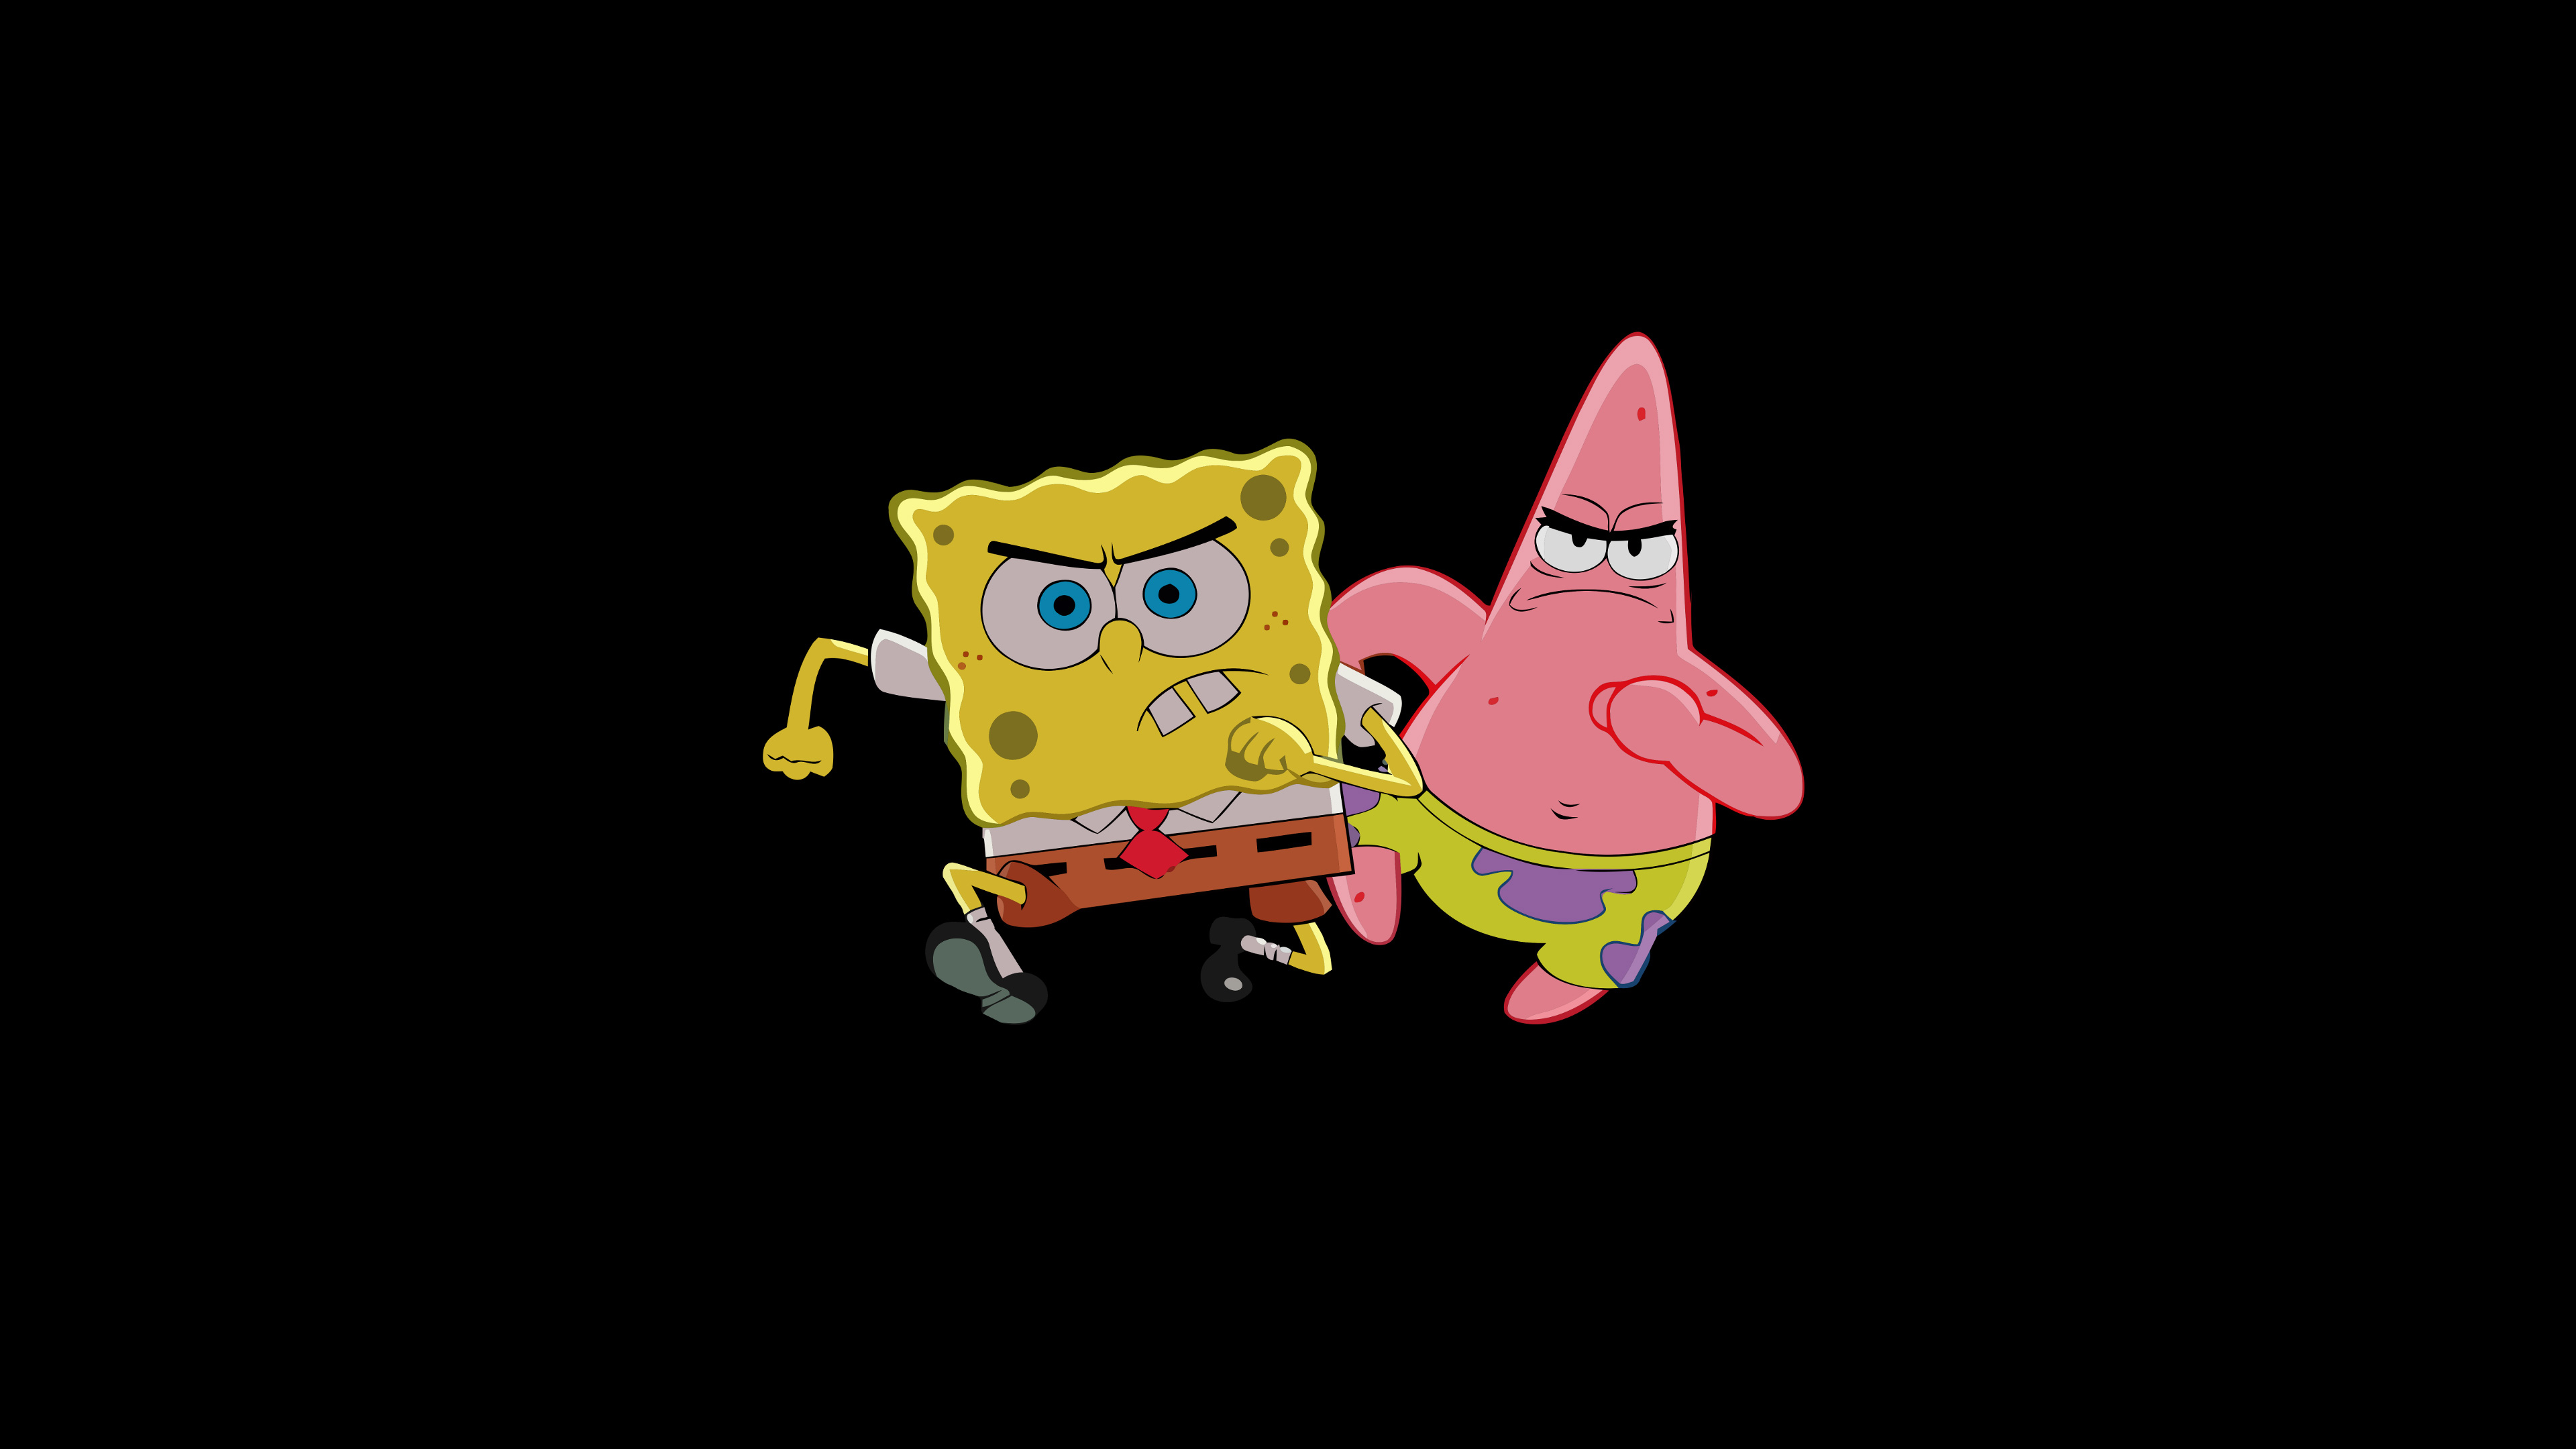 3840x2160 Patrick Star And Spongebob, HD Cartoons, 4k Wallpapers, Images, Backgrounds, Photos and Pictures